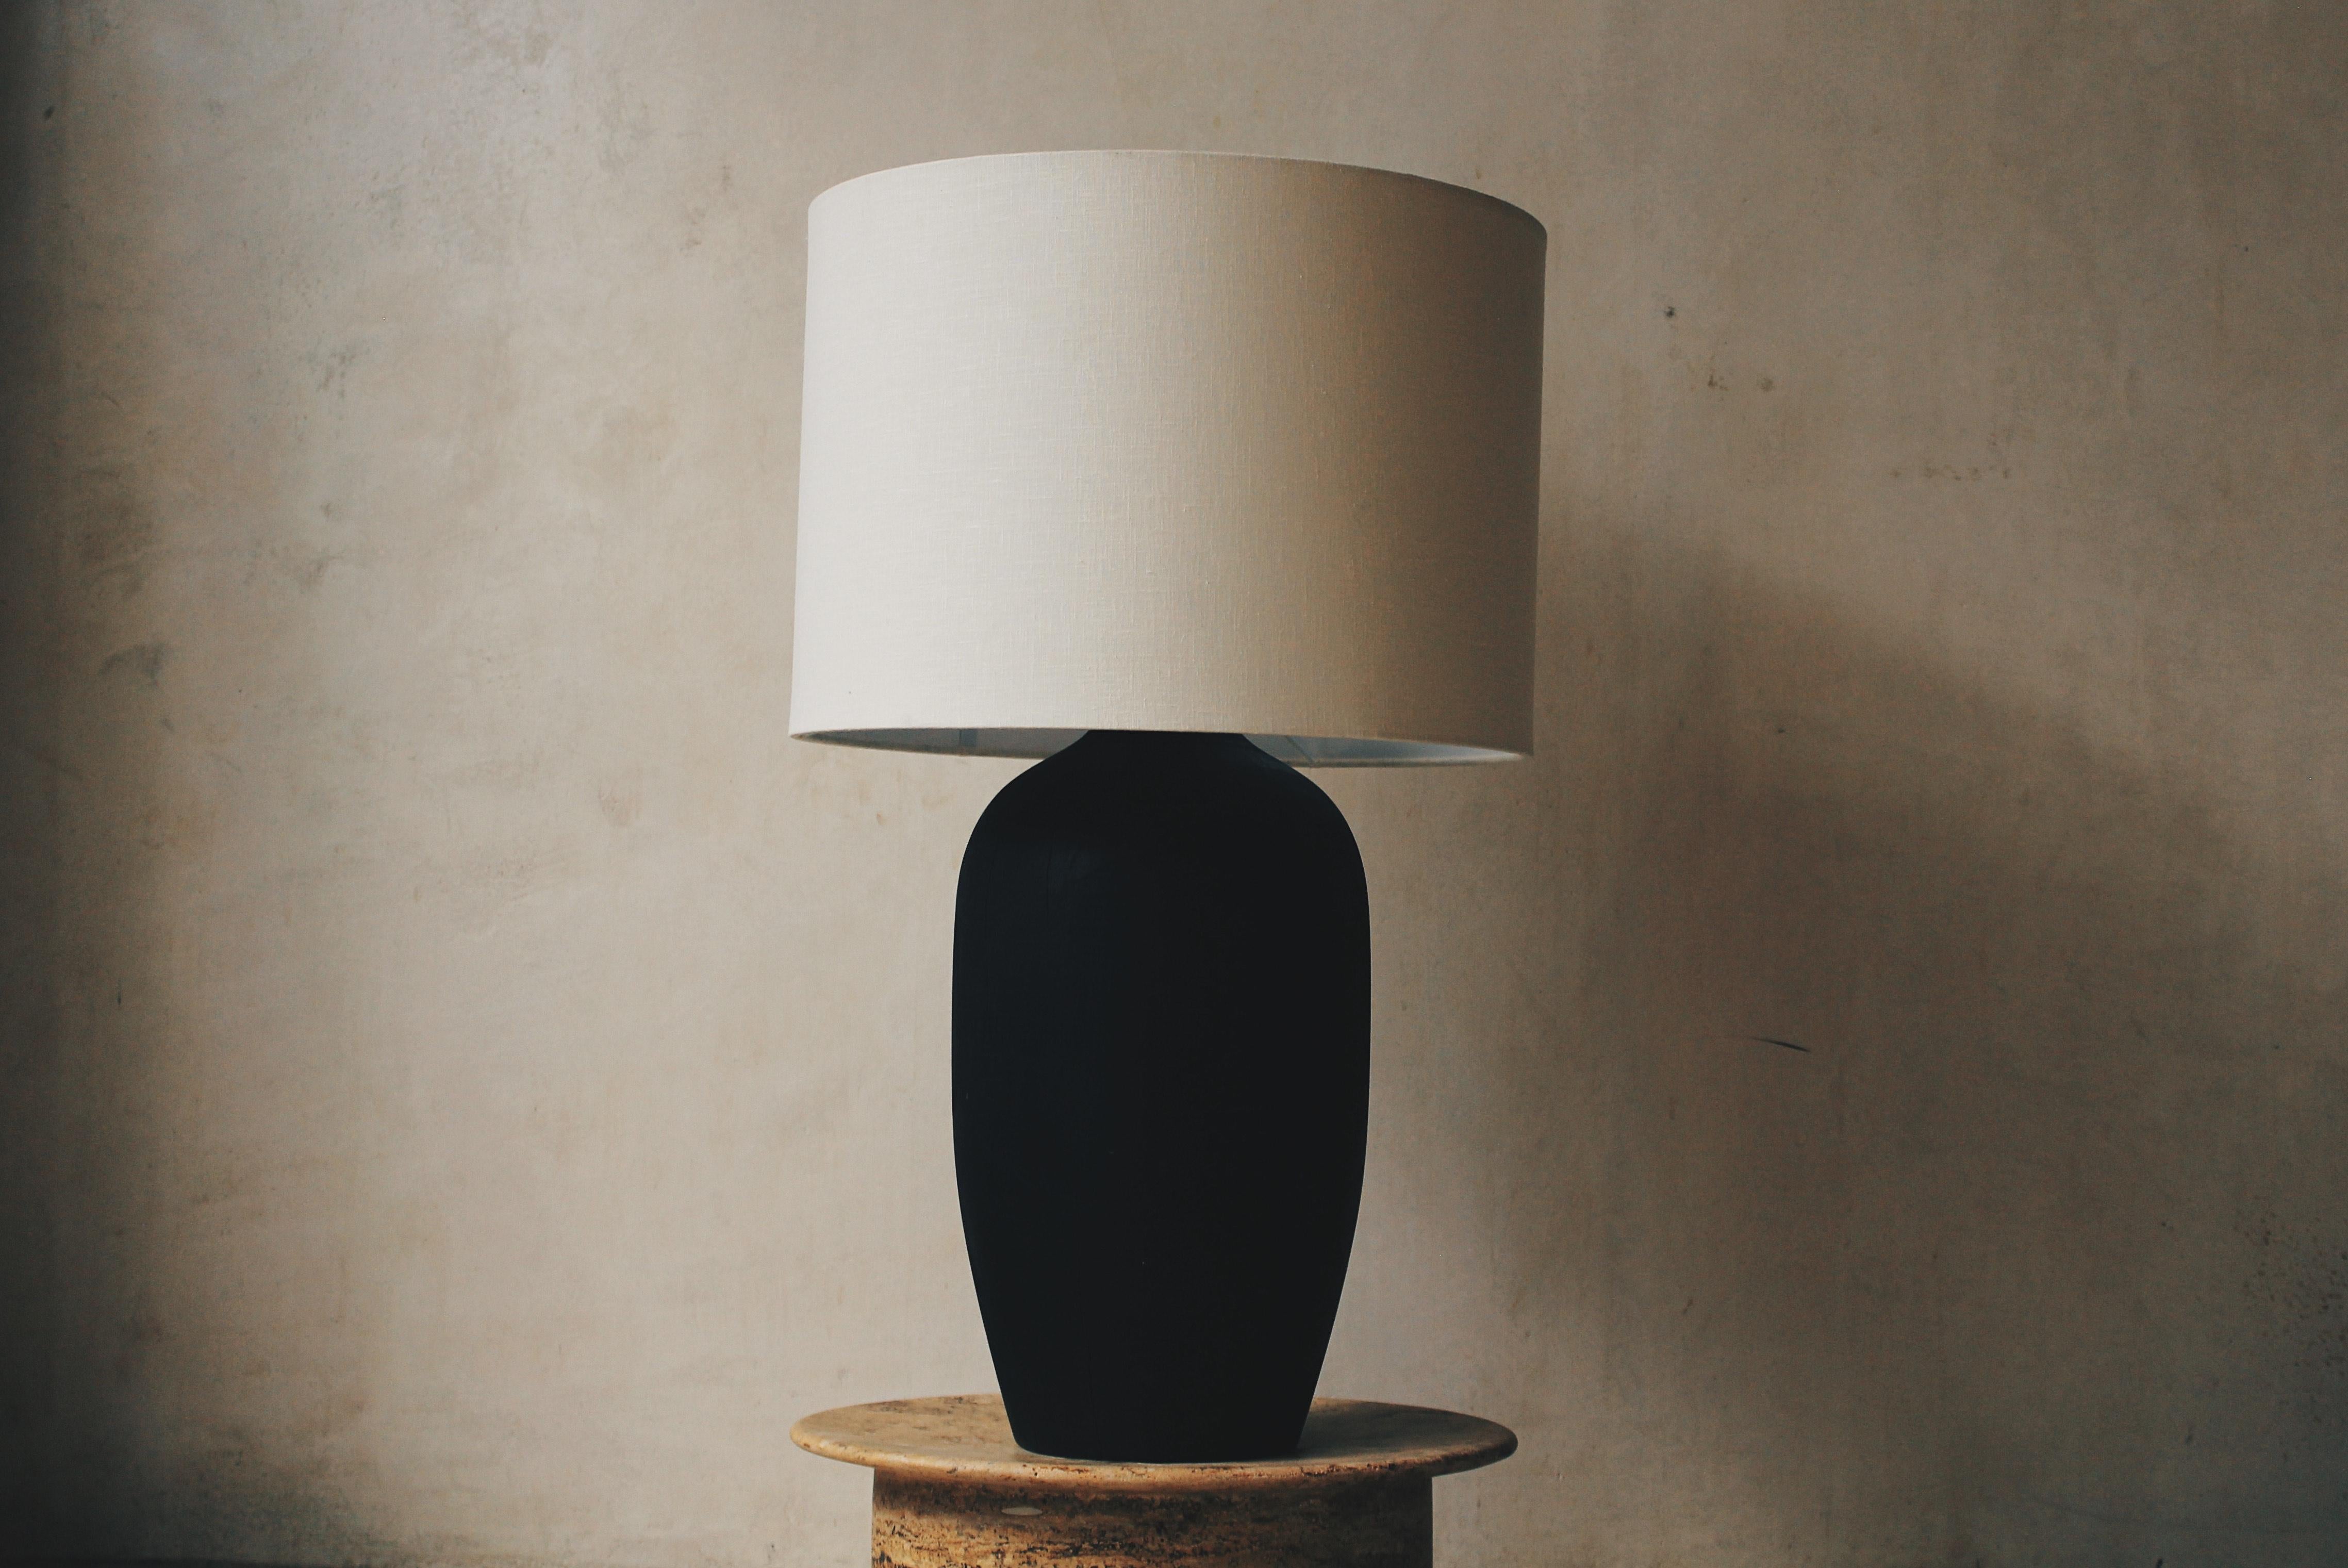 Lamp with wooden base burned and Linen shade by Daniel Orozco
Dimensions: D 18 x H 57 cm
Materials: Wood, linen

All our lamps can be wired according to each country. If sold to the USA it will be wired for the USA for instance.

Daniel Orozco